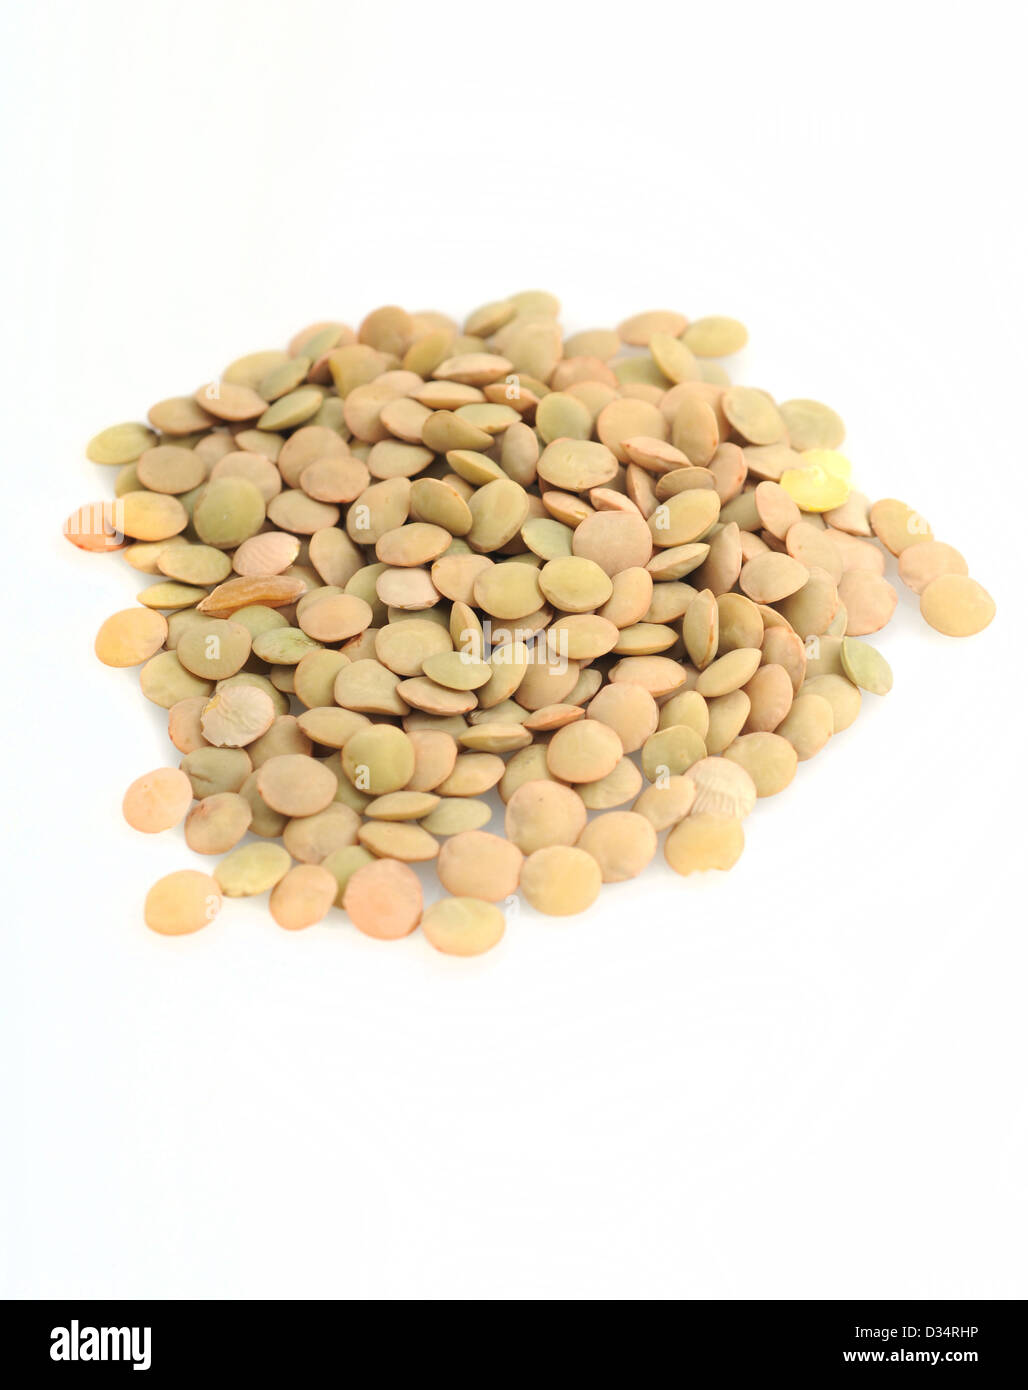 Lentils on a white background Stock Photo